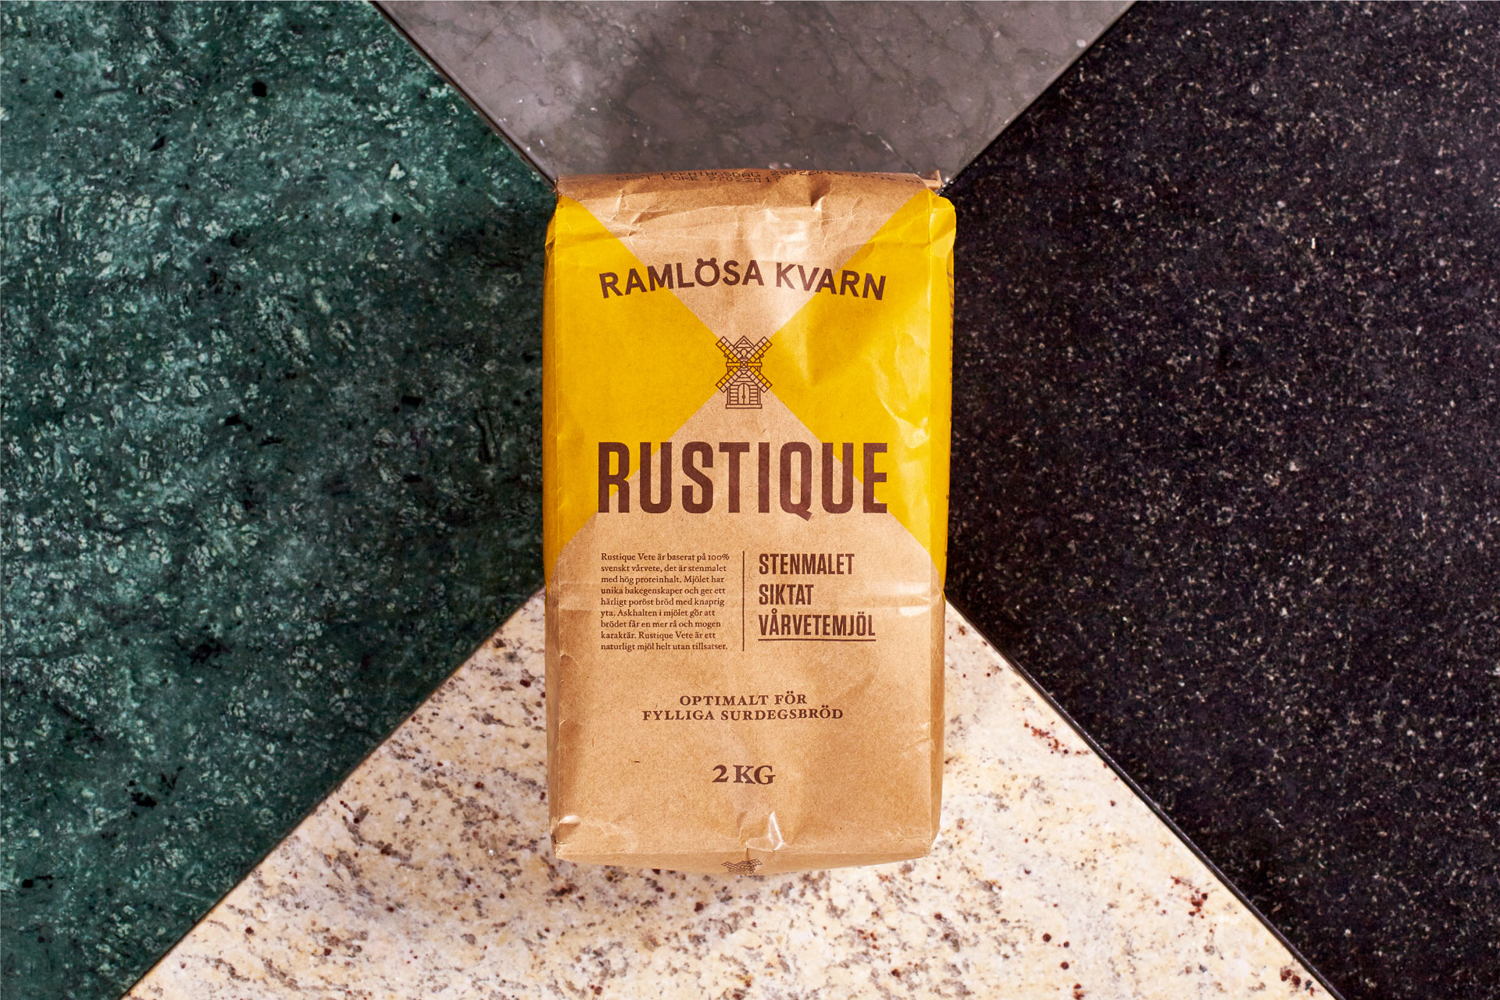 Branding and packaging for Swedish flour business Ramlösa Kvarn by Amore.